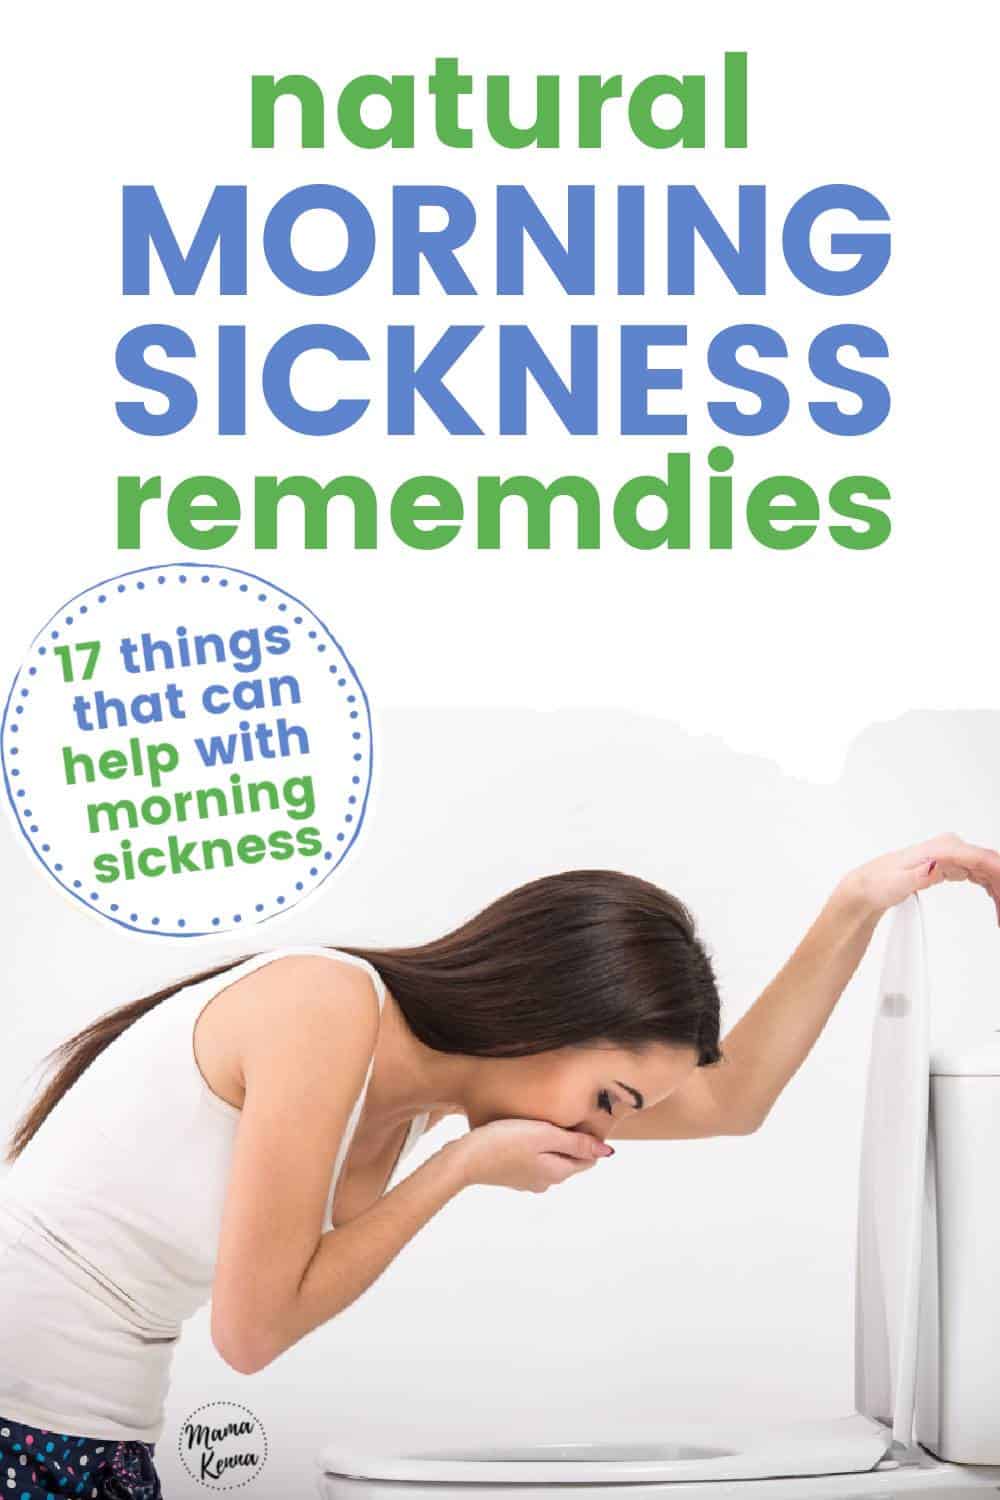 Get some relief from morning sickness with these natural cures for morning sickness